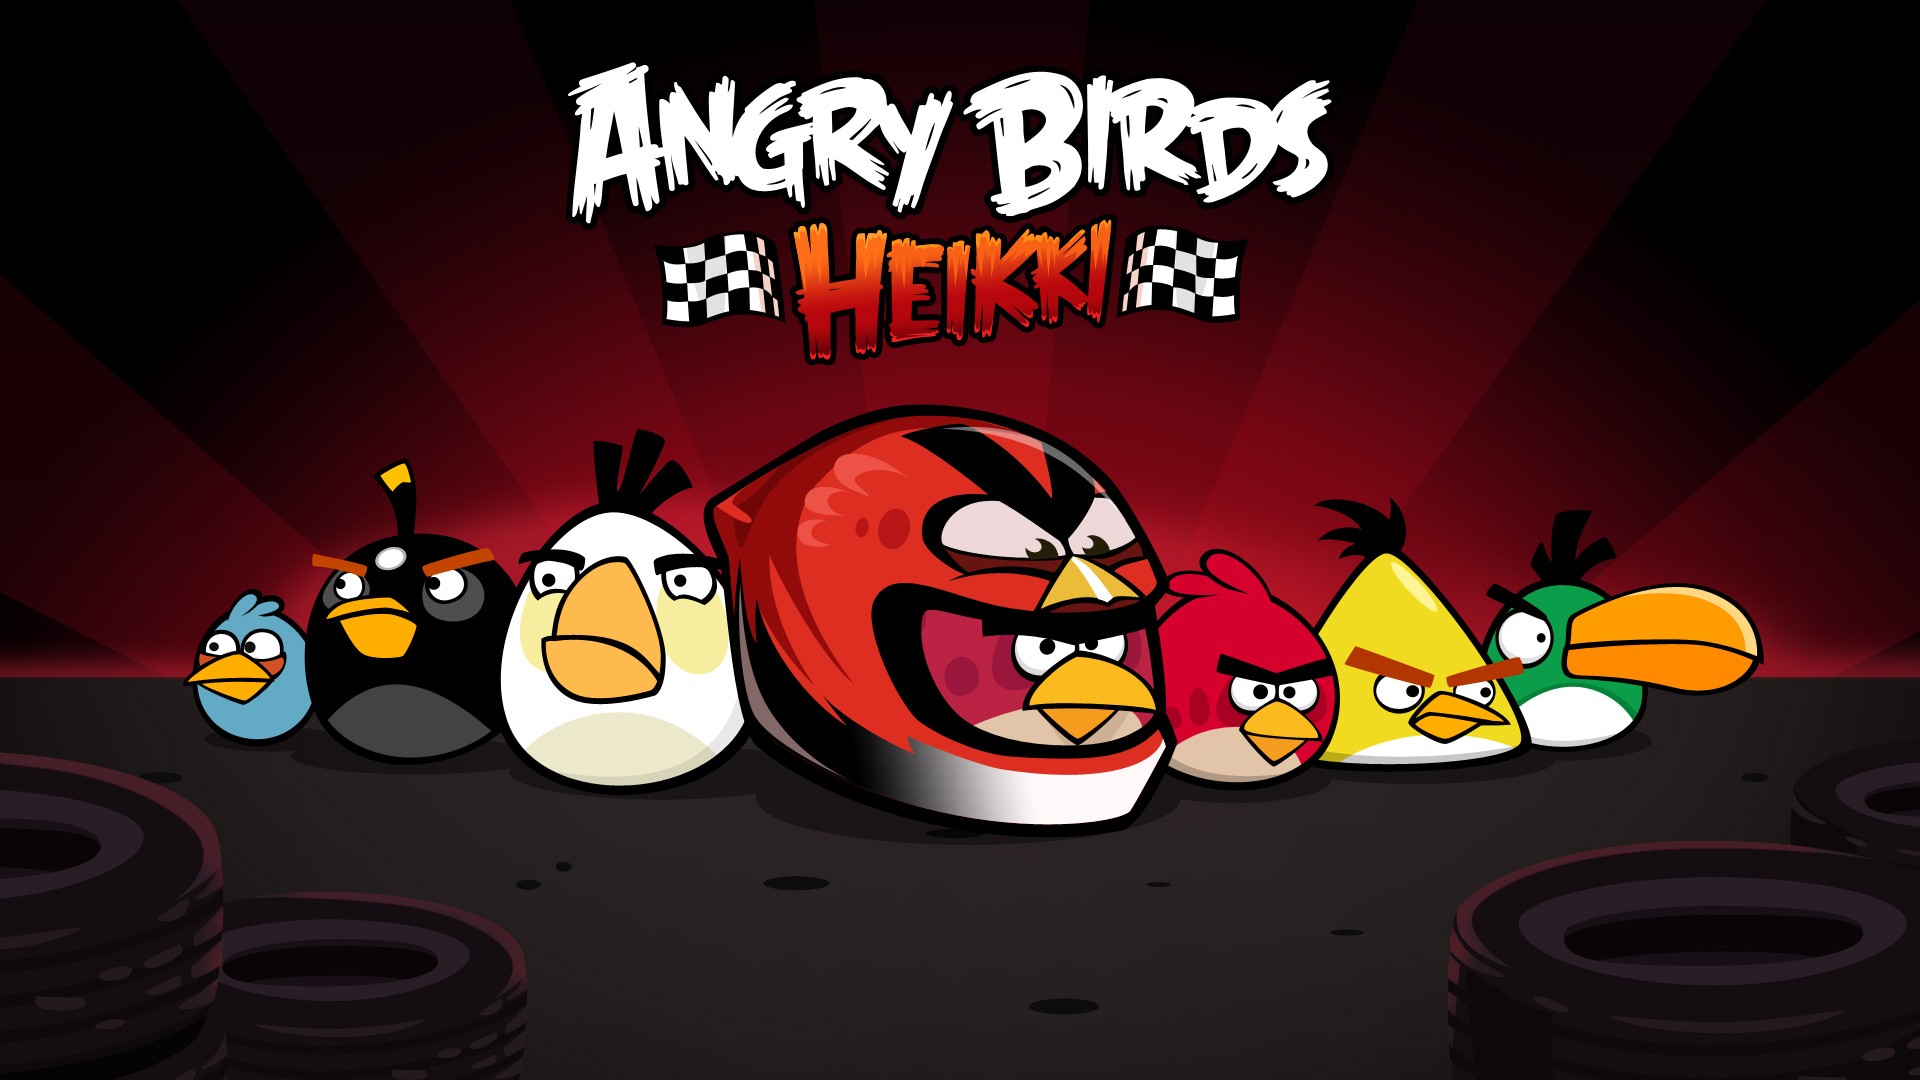 Angry birds hd wallpapers